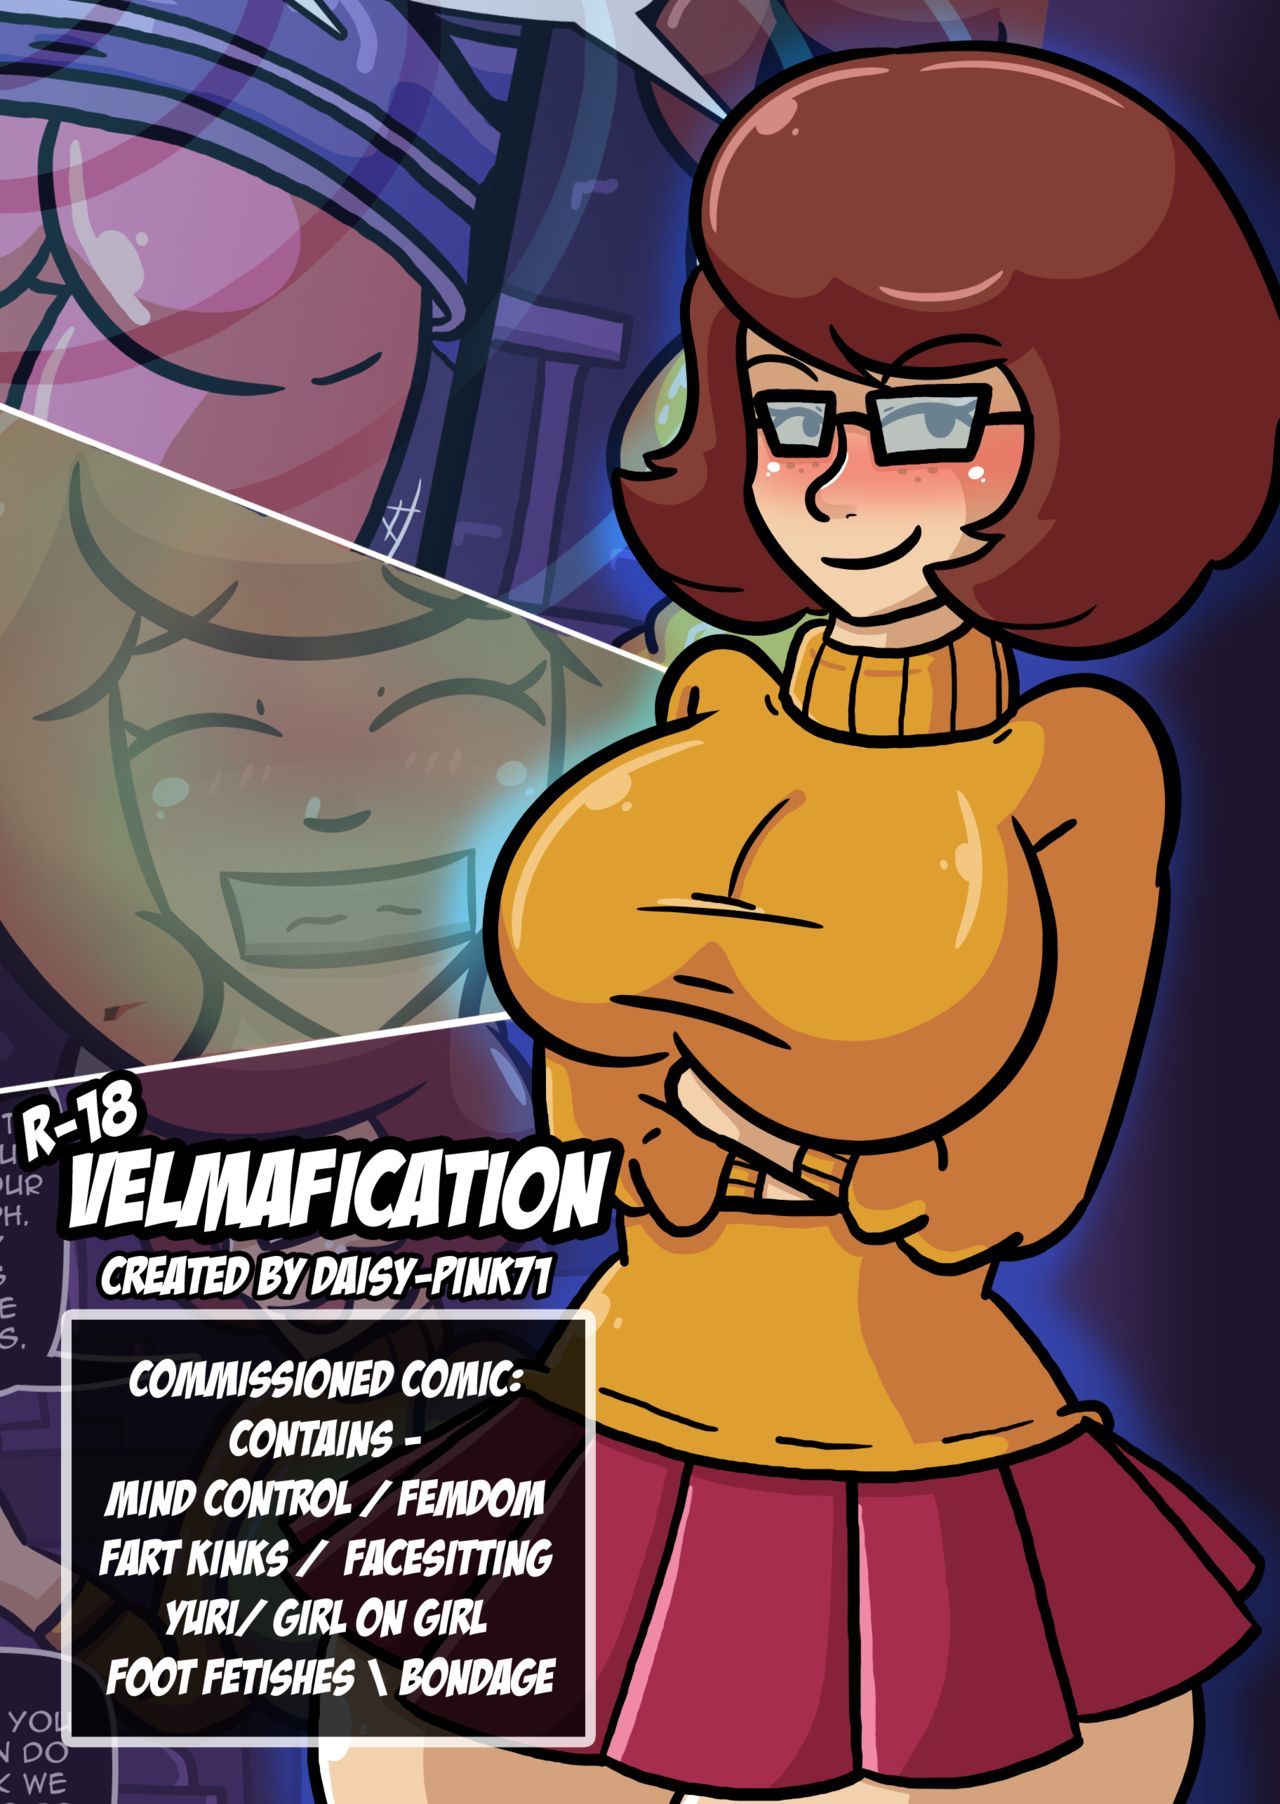 Velmafication Scooby Doo by Daisy-Pink71 page 1